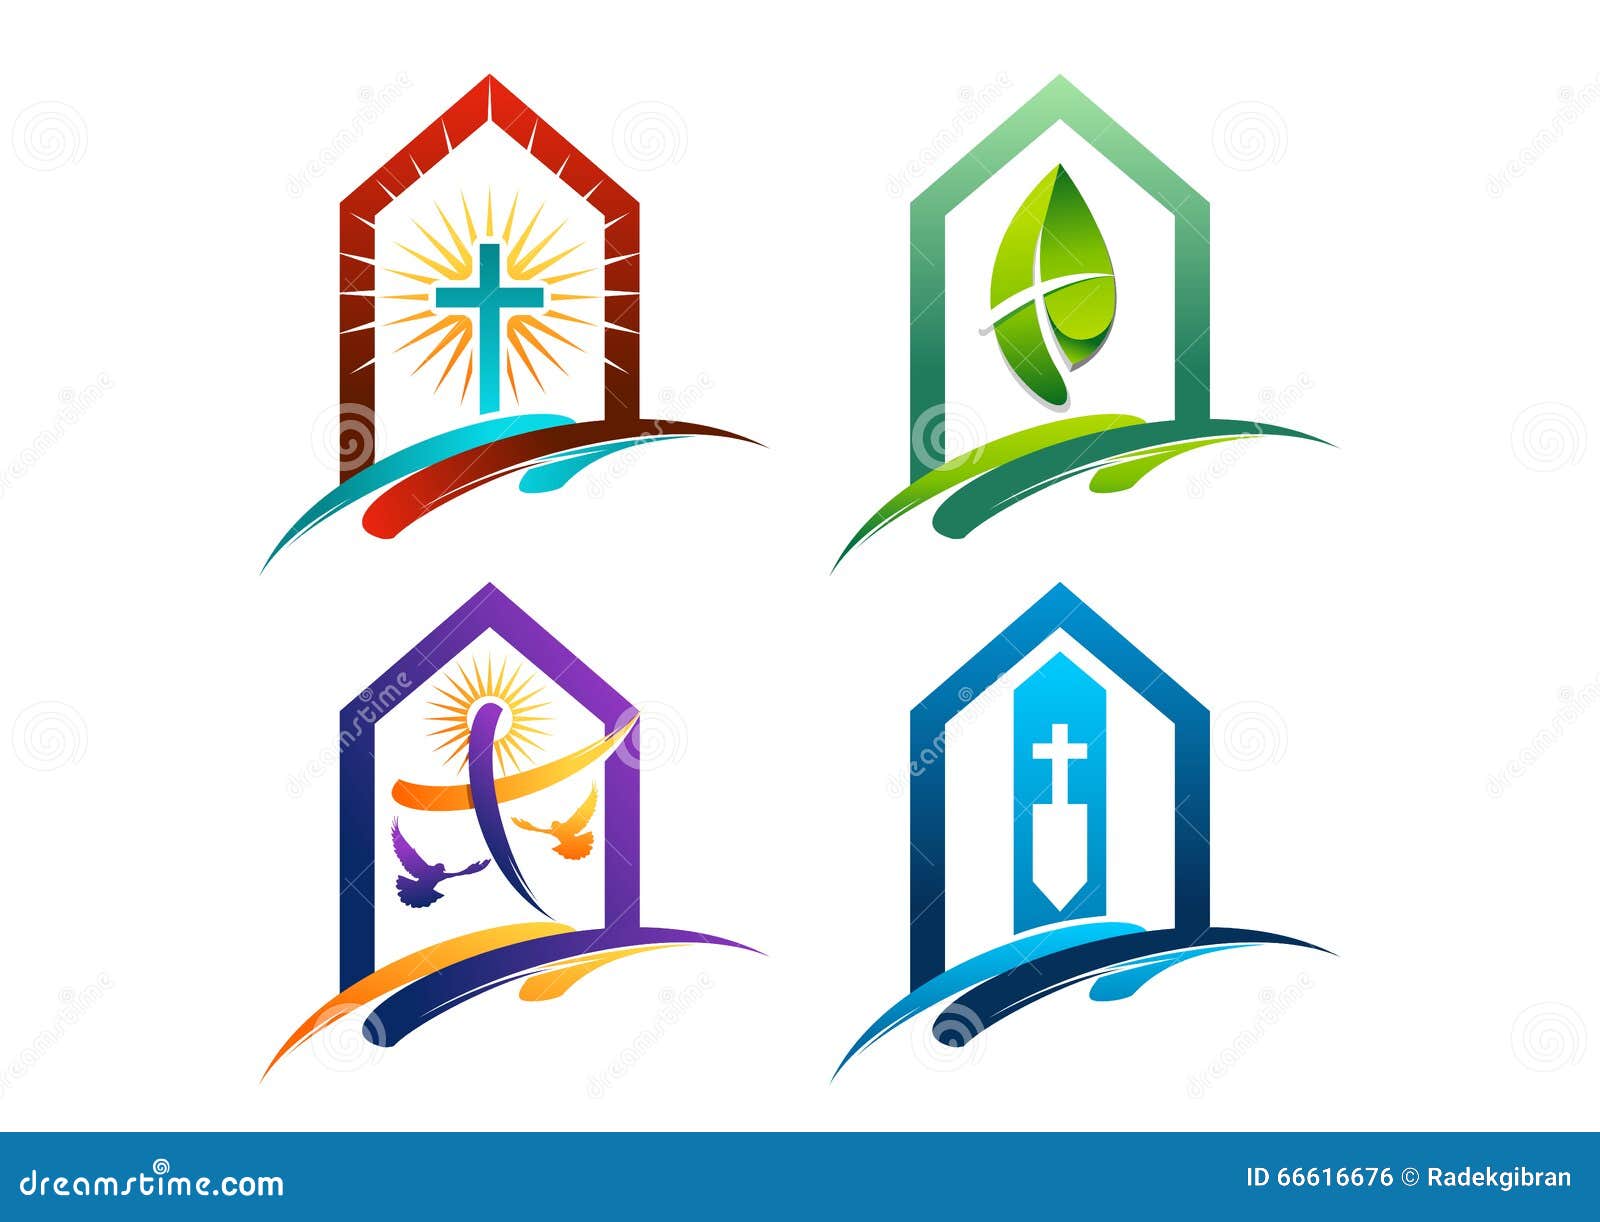 the concept of logos houses of worship to christianity